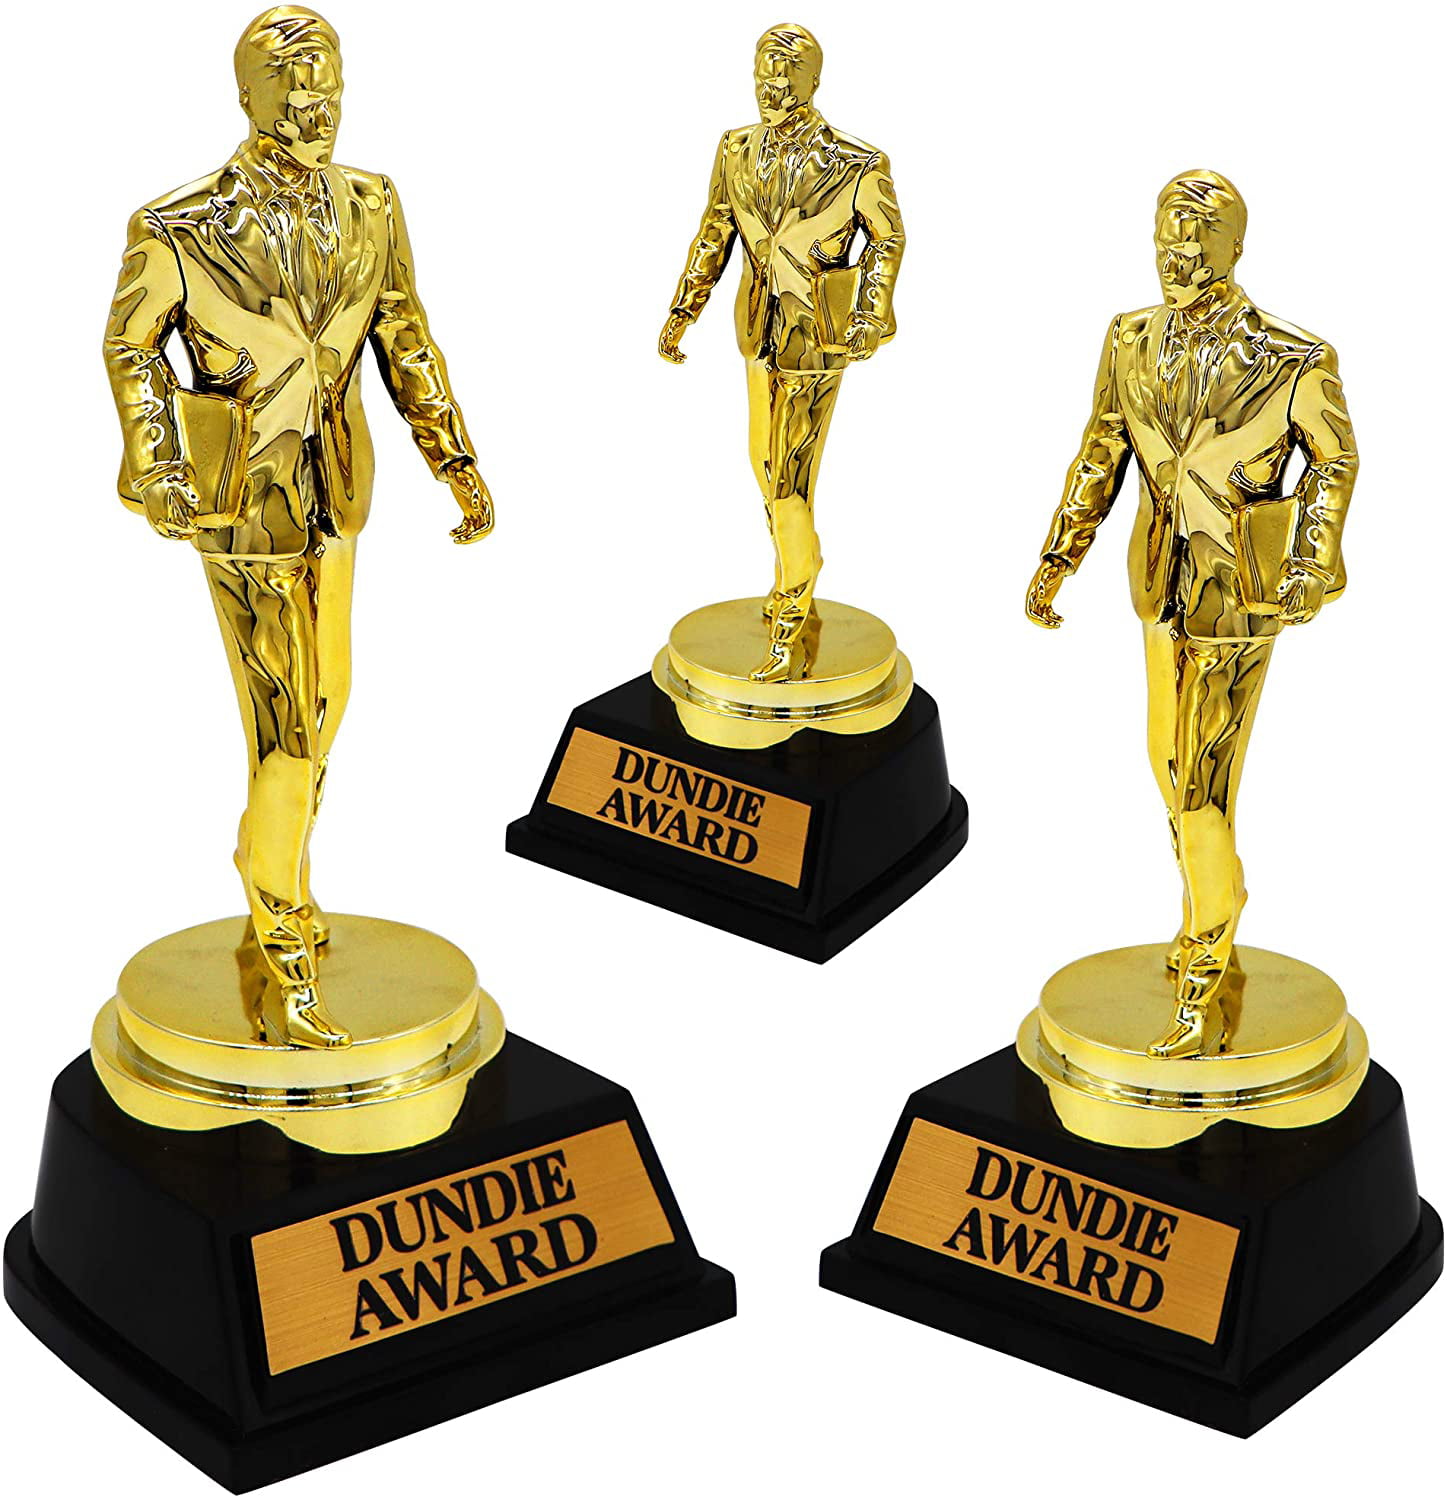 The Office Dunder Mifflin Dundie Award Trophy with personalized engraved plate 